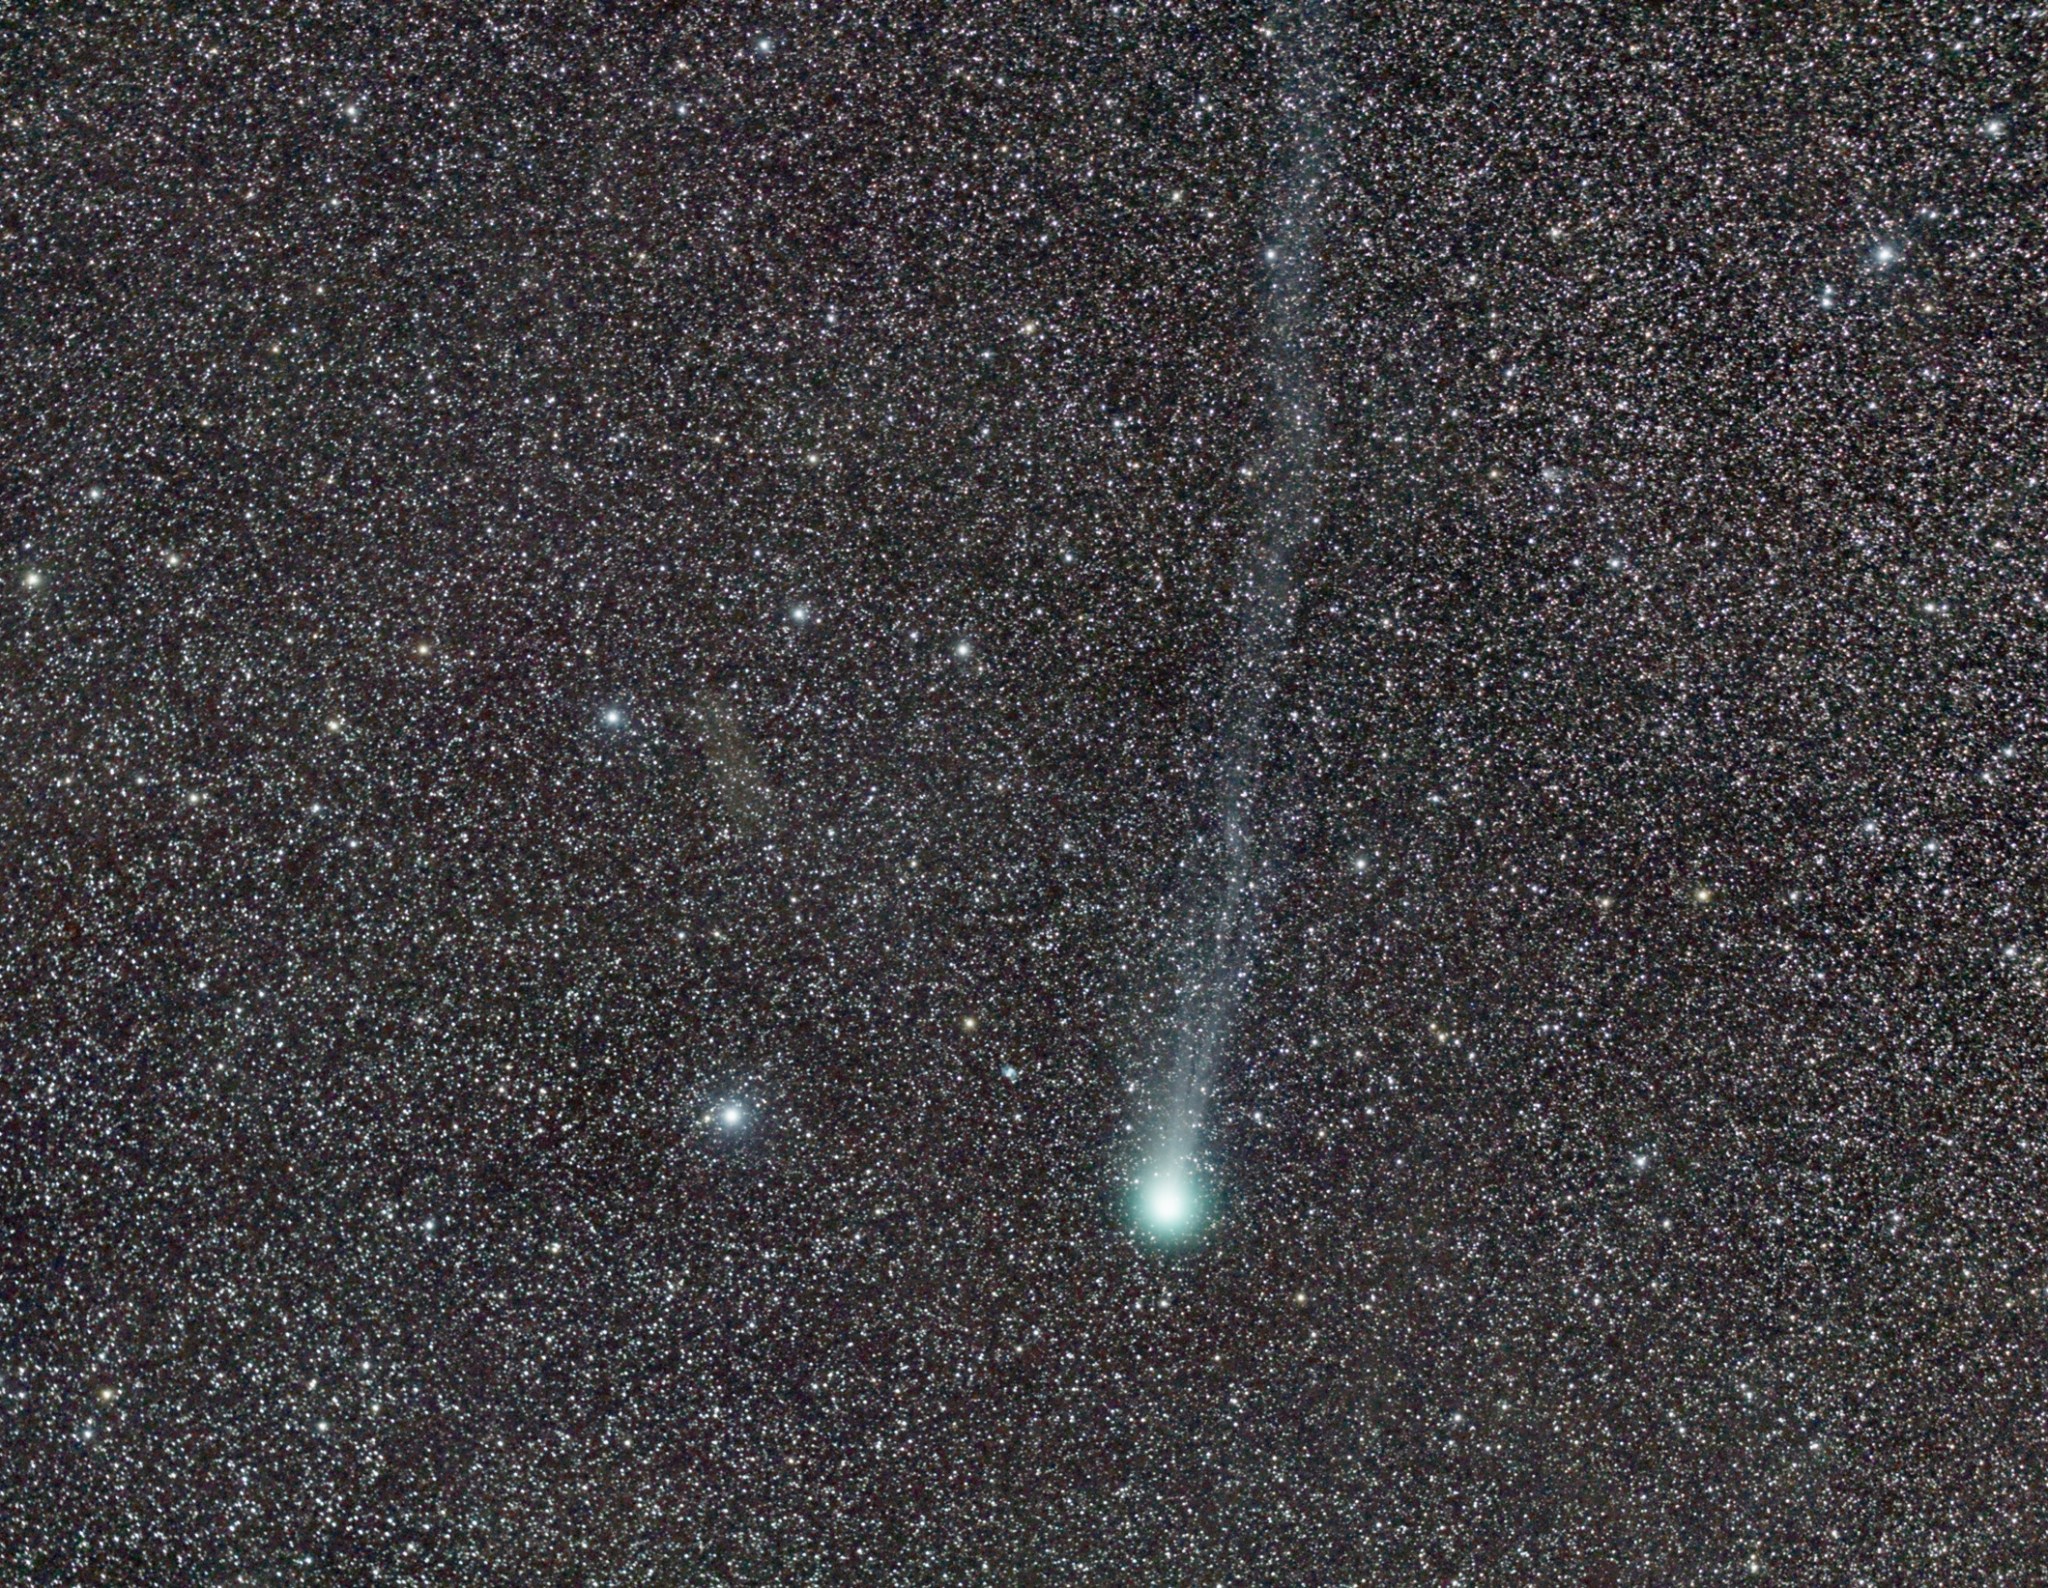 Picture of comet Lovejoy